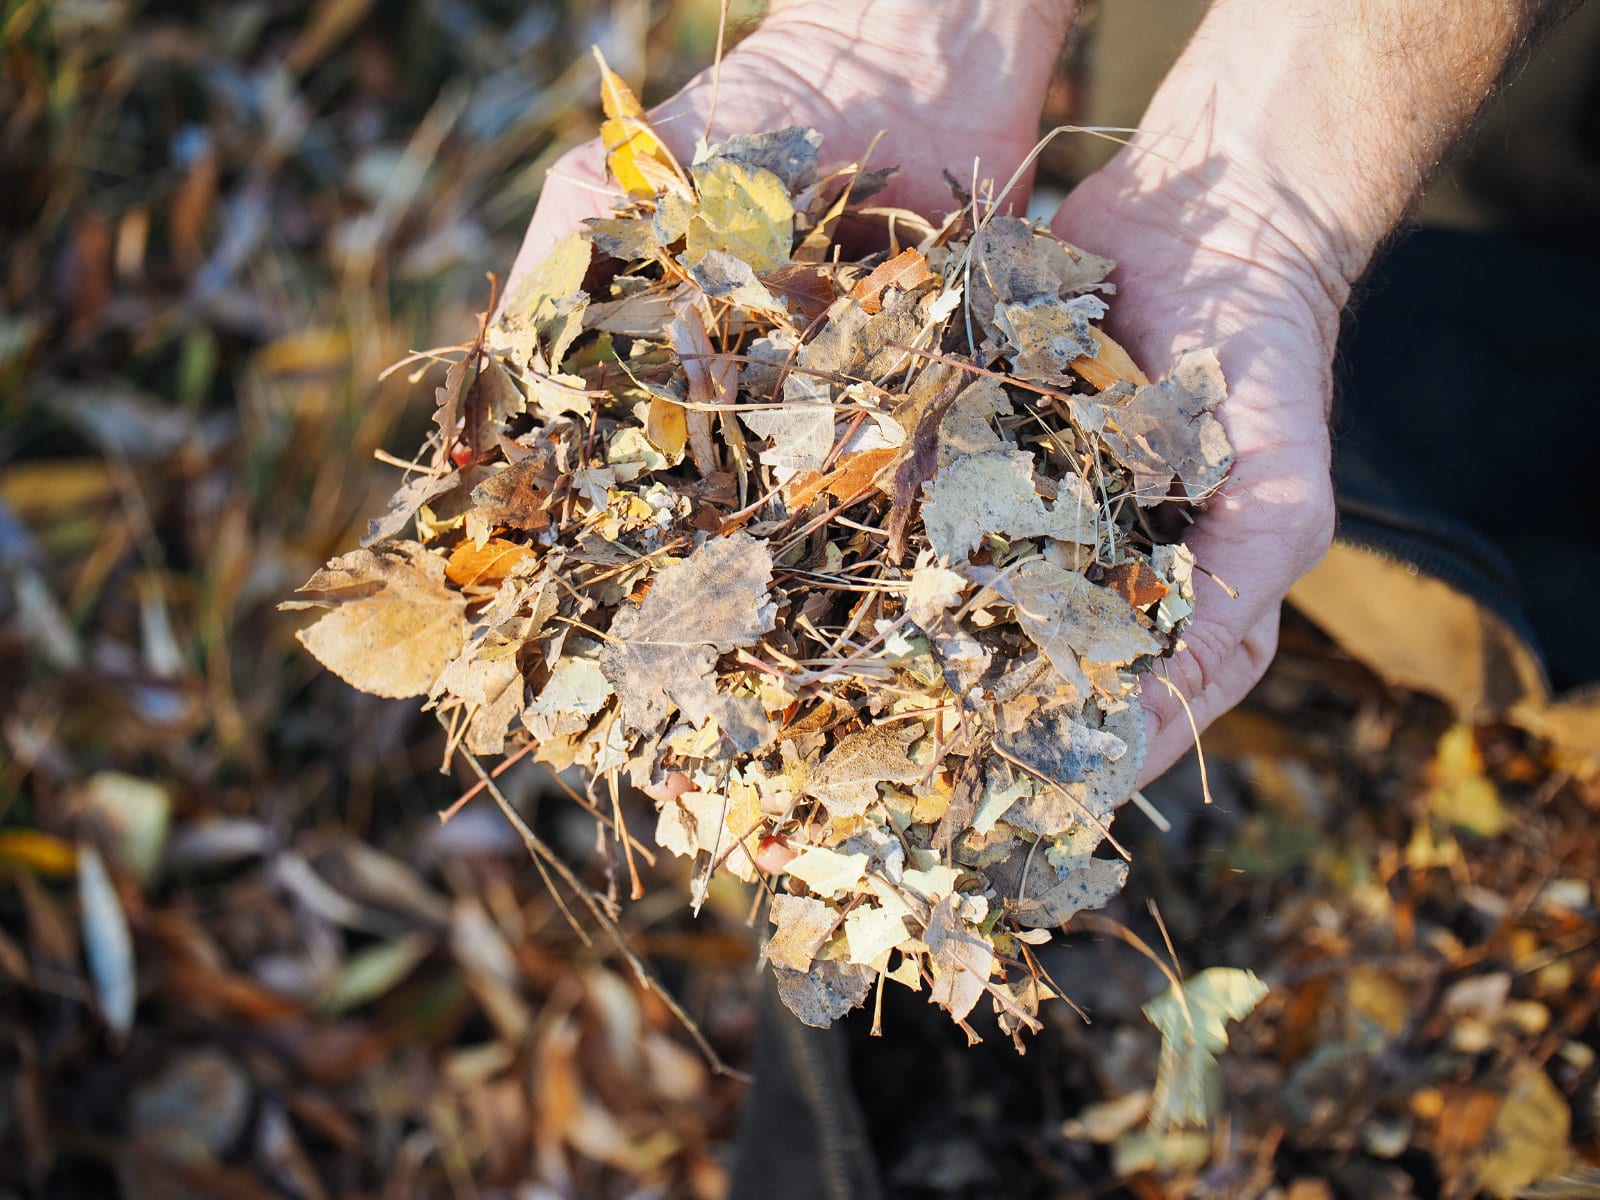 Mulched leaves can be added to a compost pile